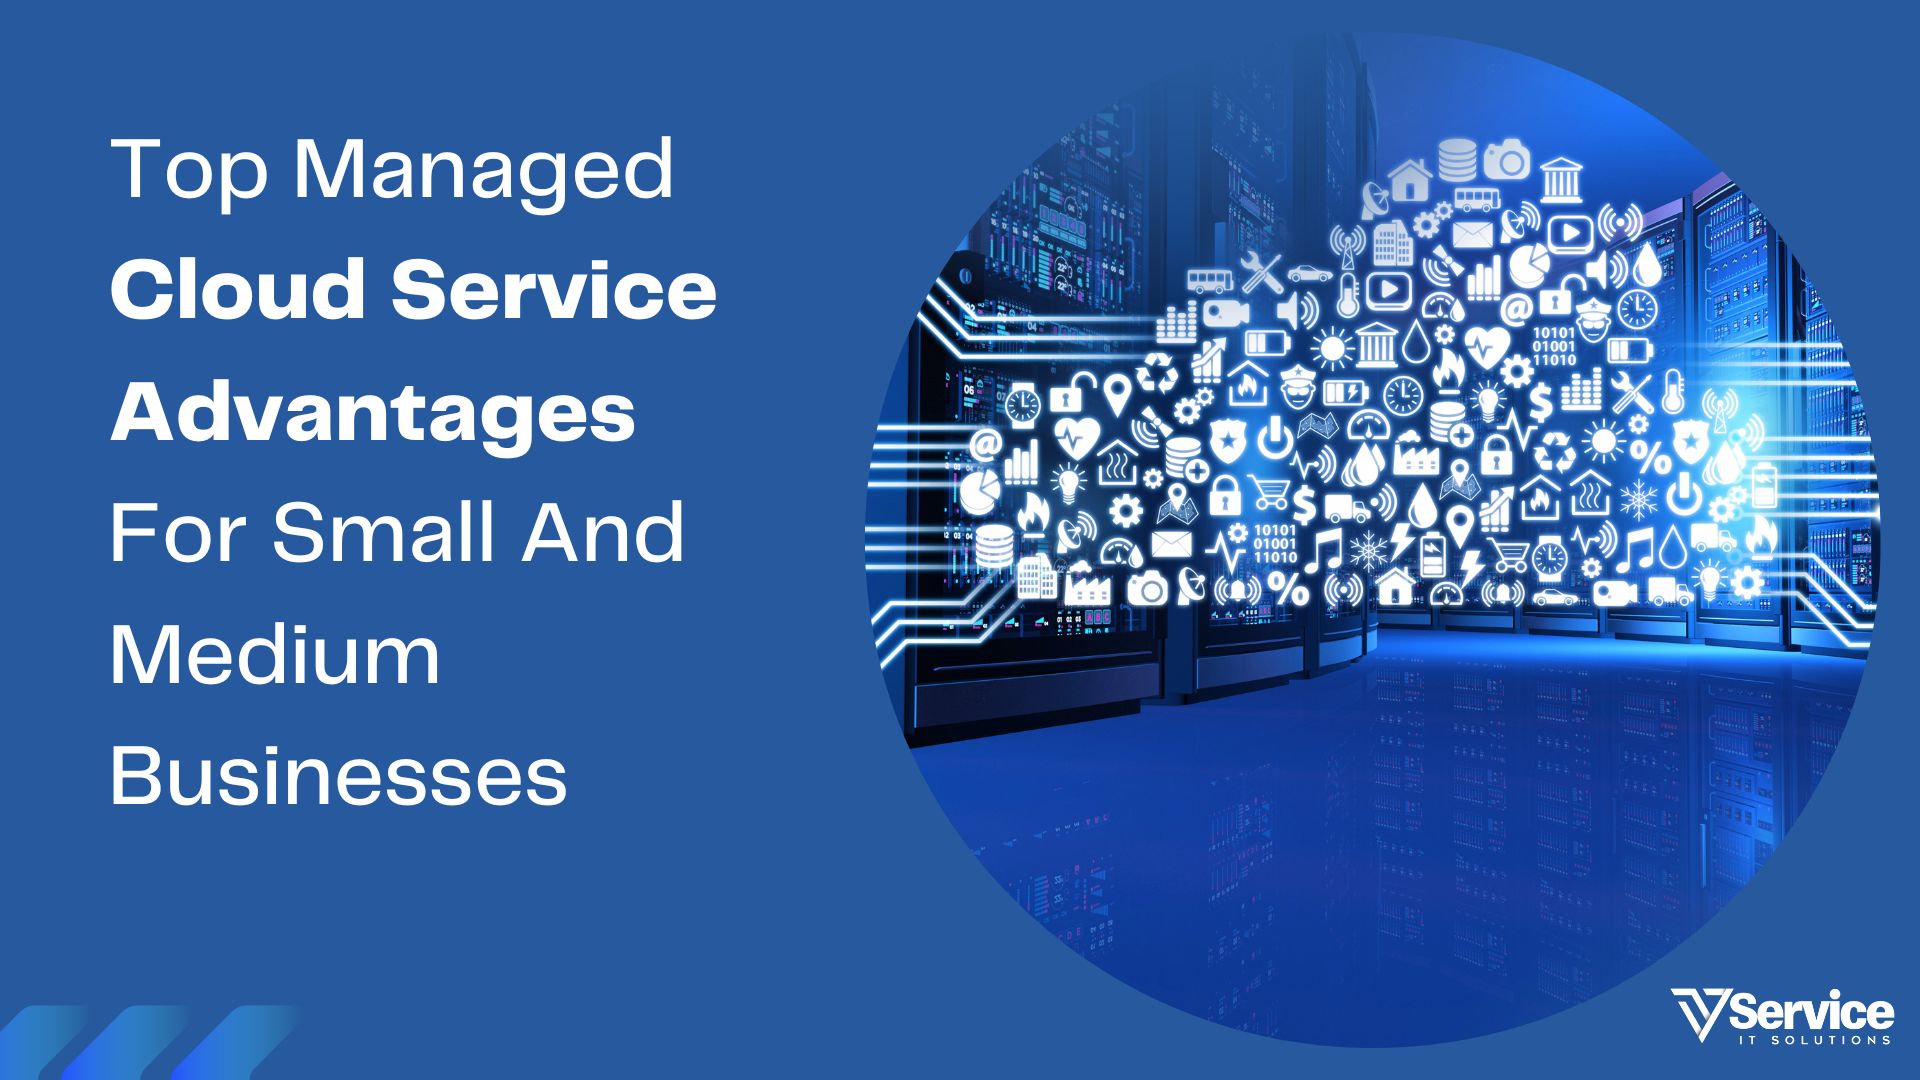 Top Managed Cloud Service Advantages For Small And Medium Businesses